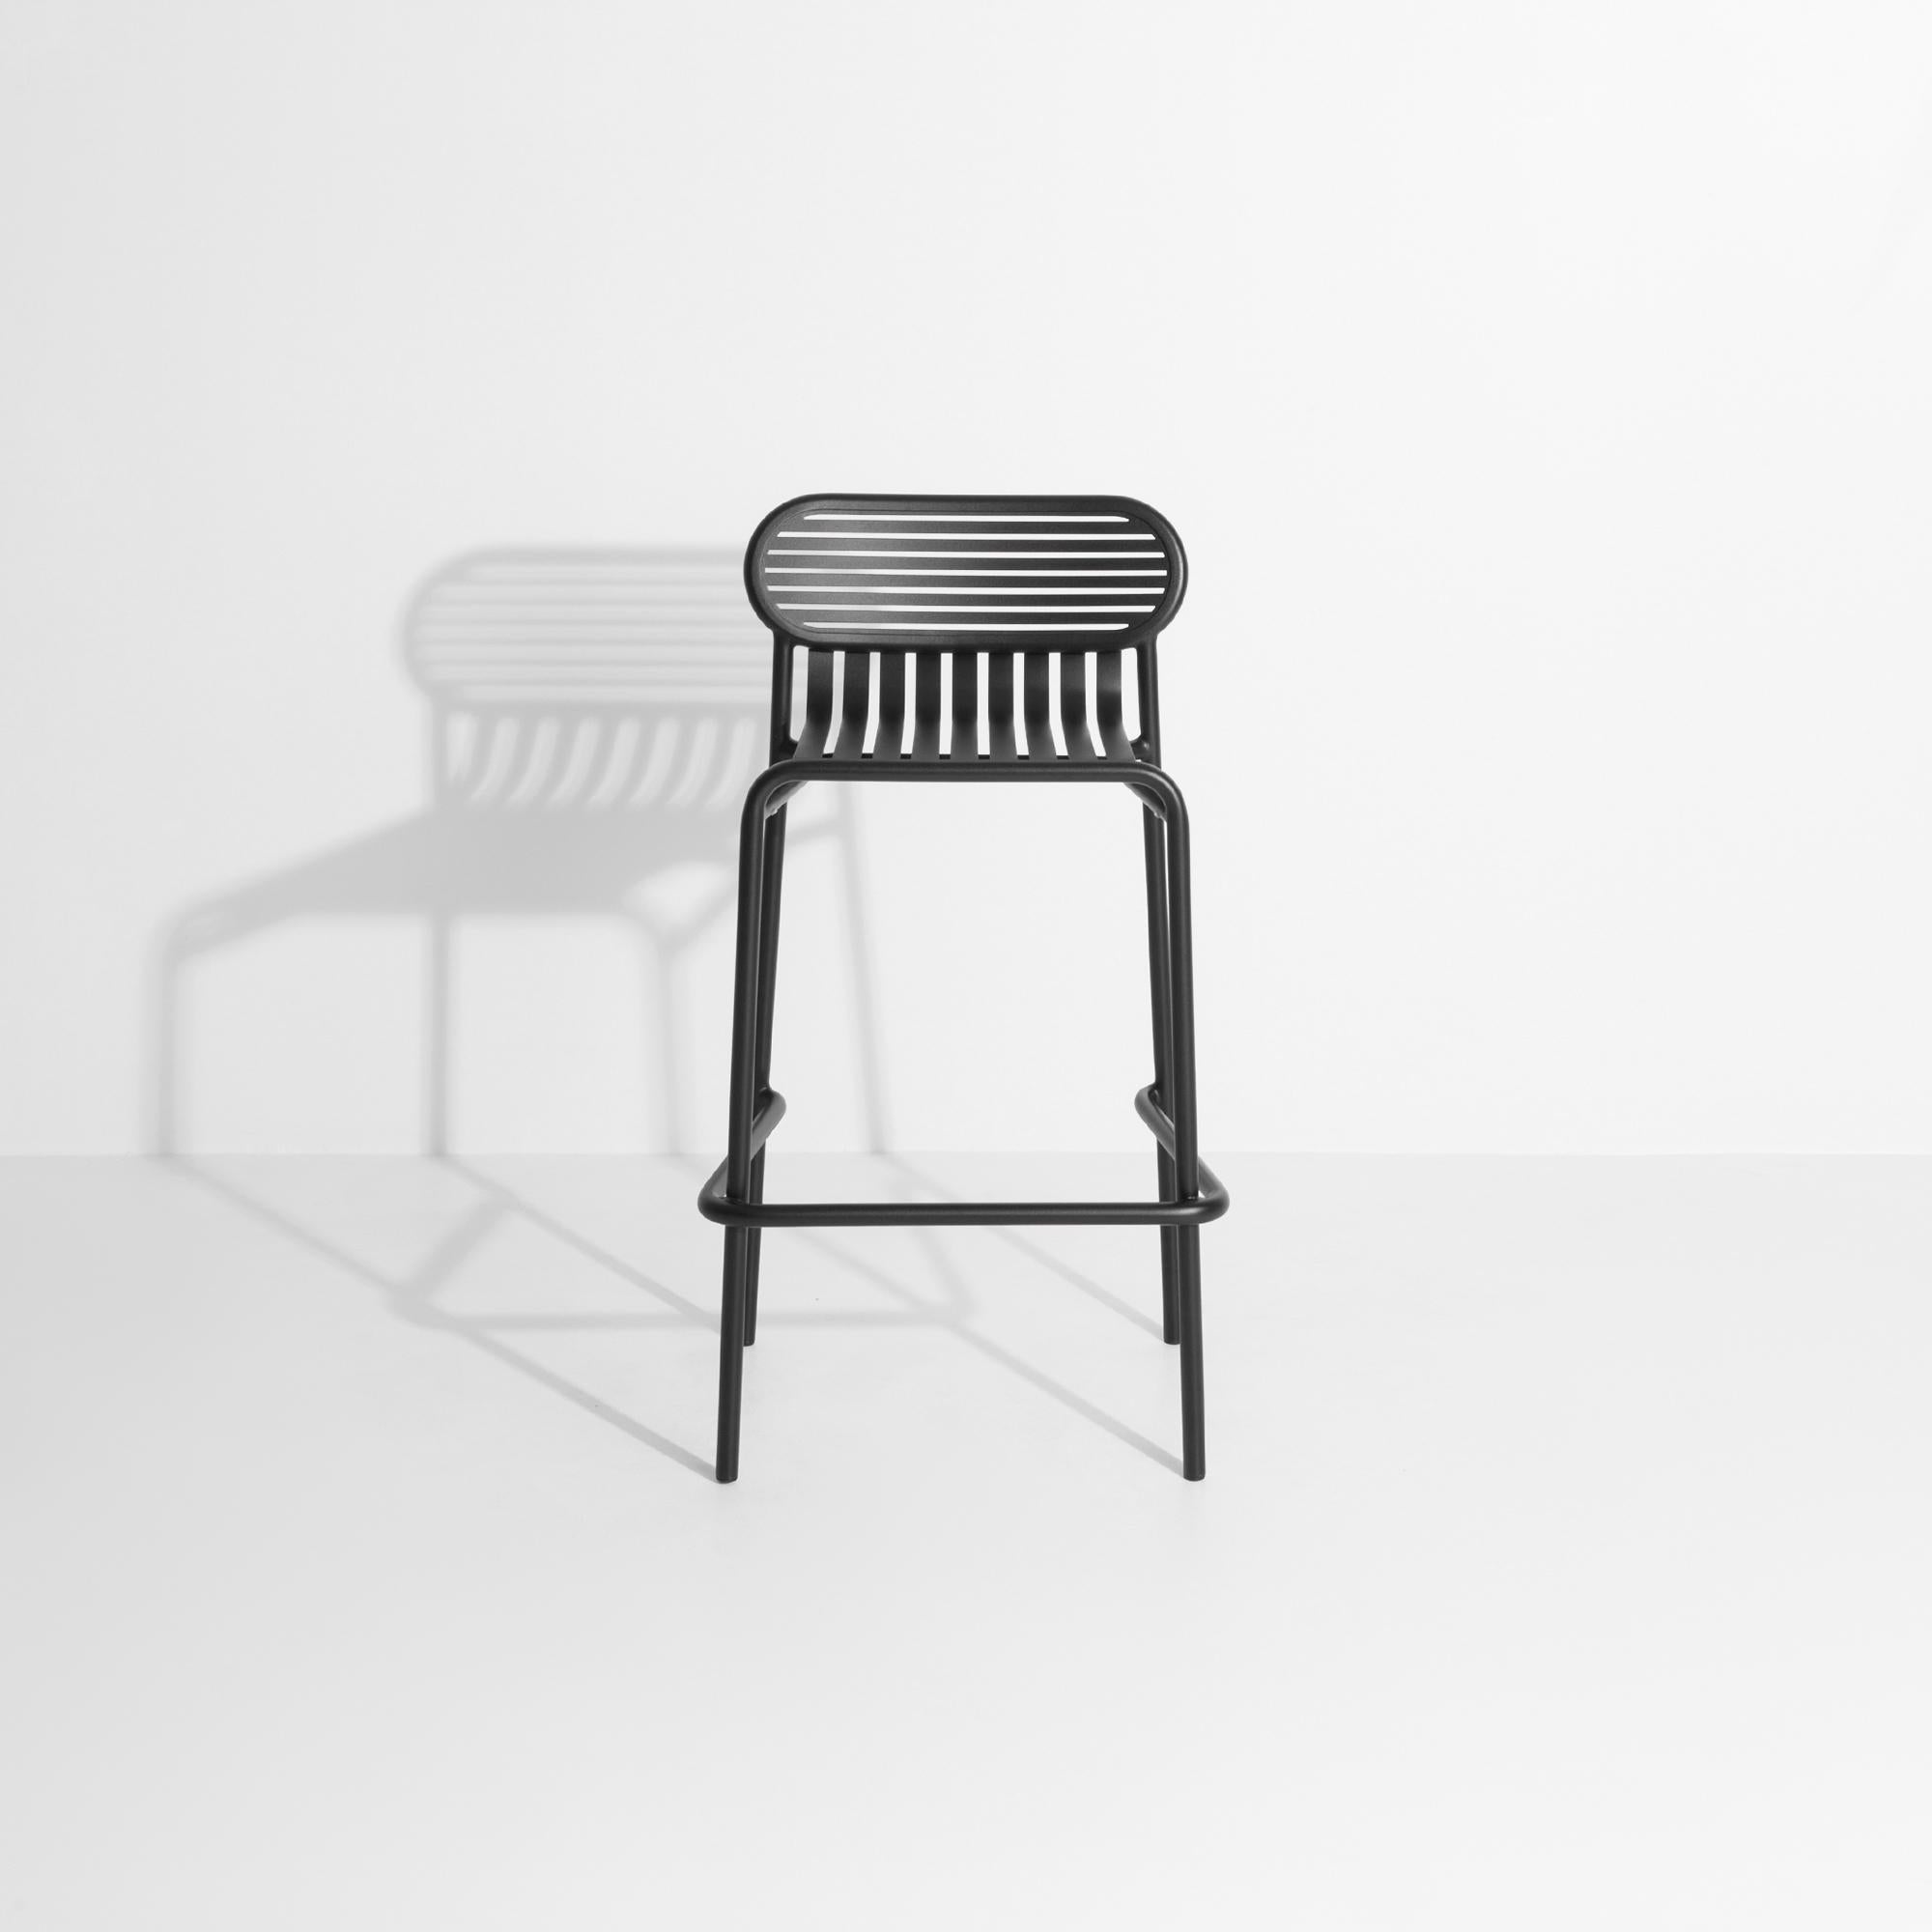 Petite Friture Week-End Bar Stool in Black Aluminium by Studio BrichetZiegler In New Condition For Sale In Brooklyn, NY